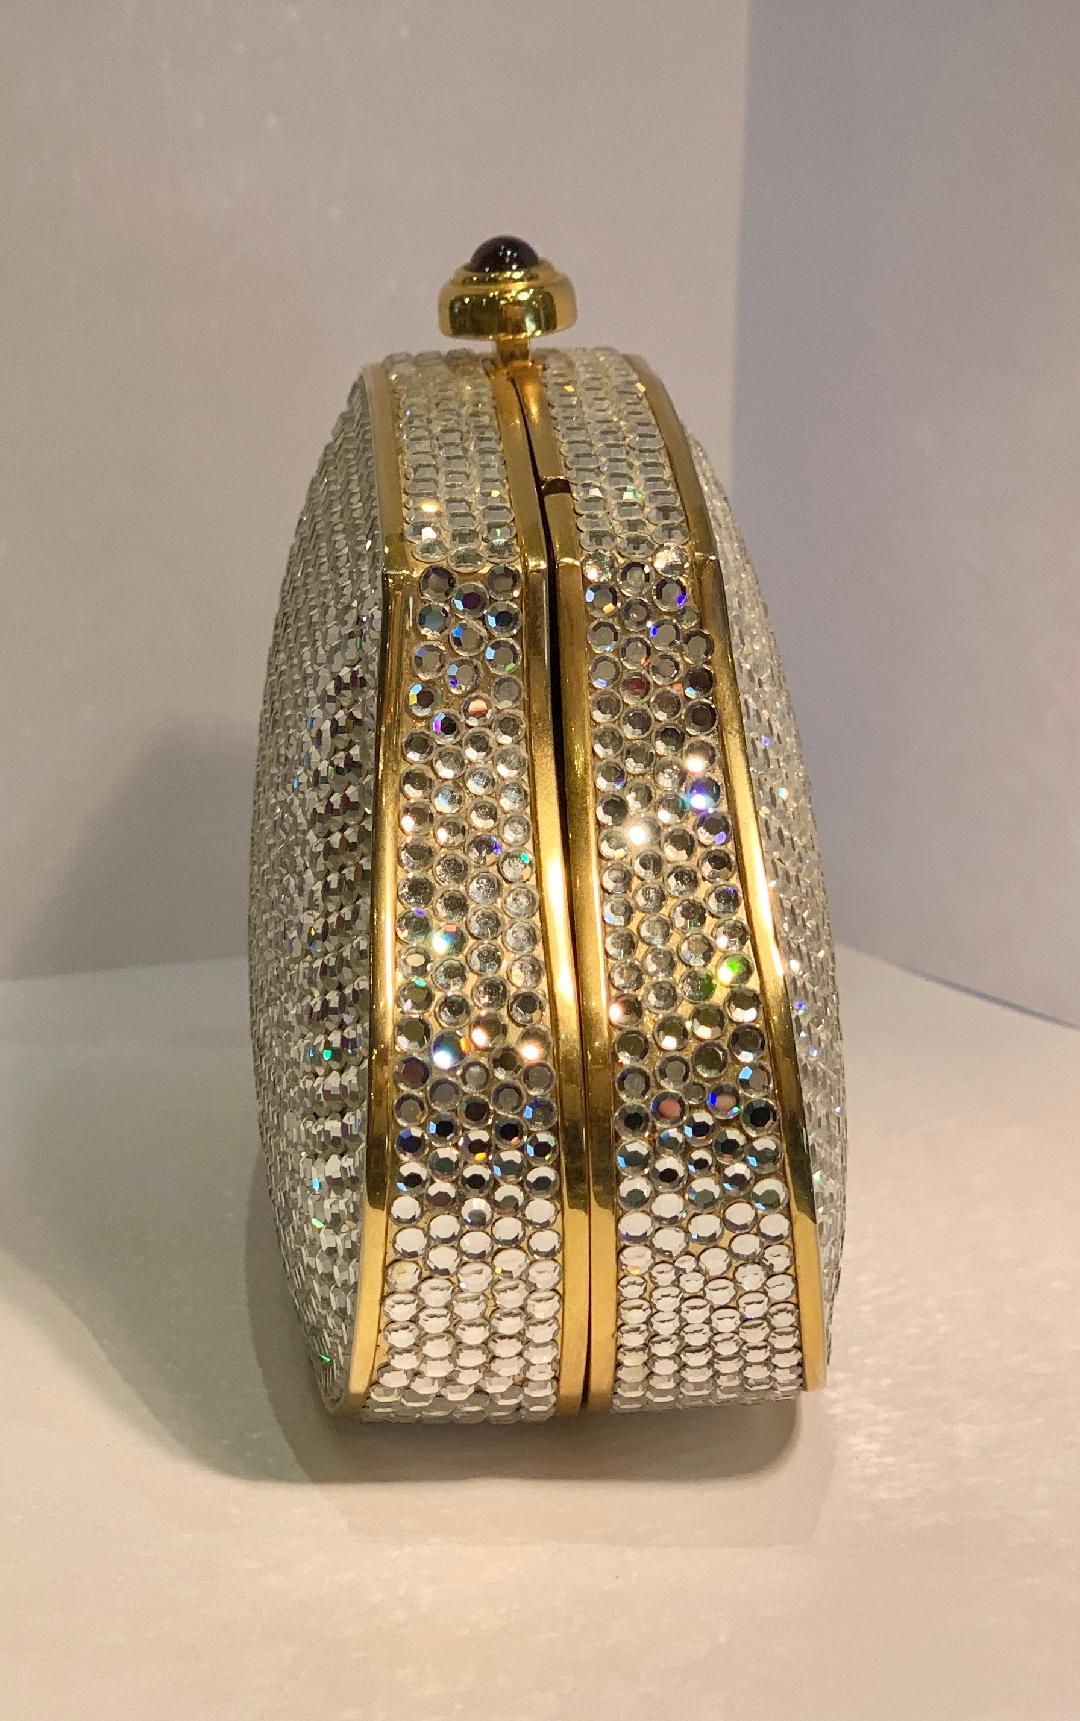 Exquisite couture designer, Judith Leiber, hand made clear crystal minaudiere or evening bag with gold metal frame features a gold metallic leather interior and a gold toned metal chain shoulder strap which tucks inside. Tons of handset silver